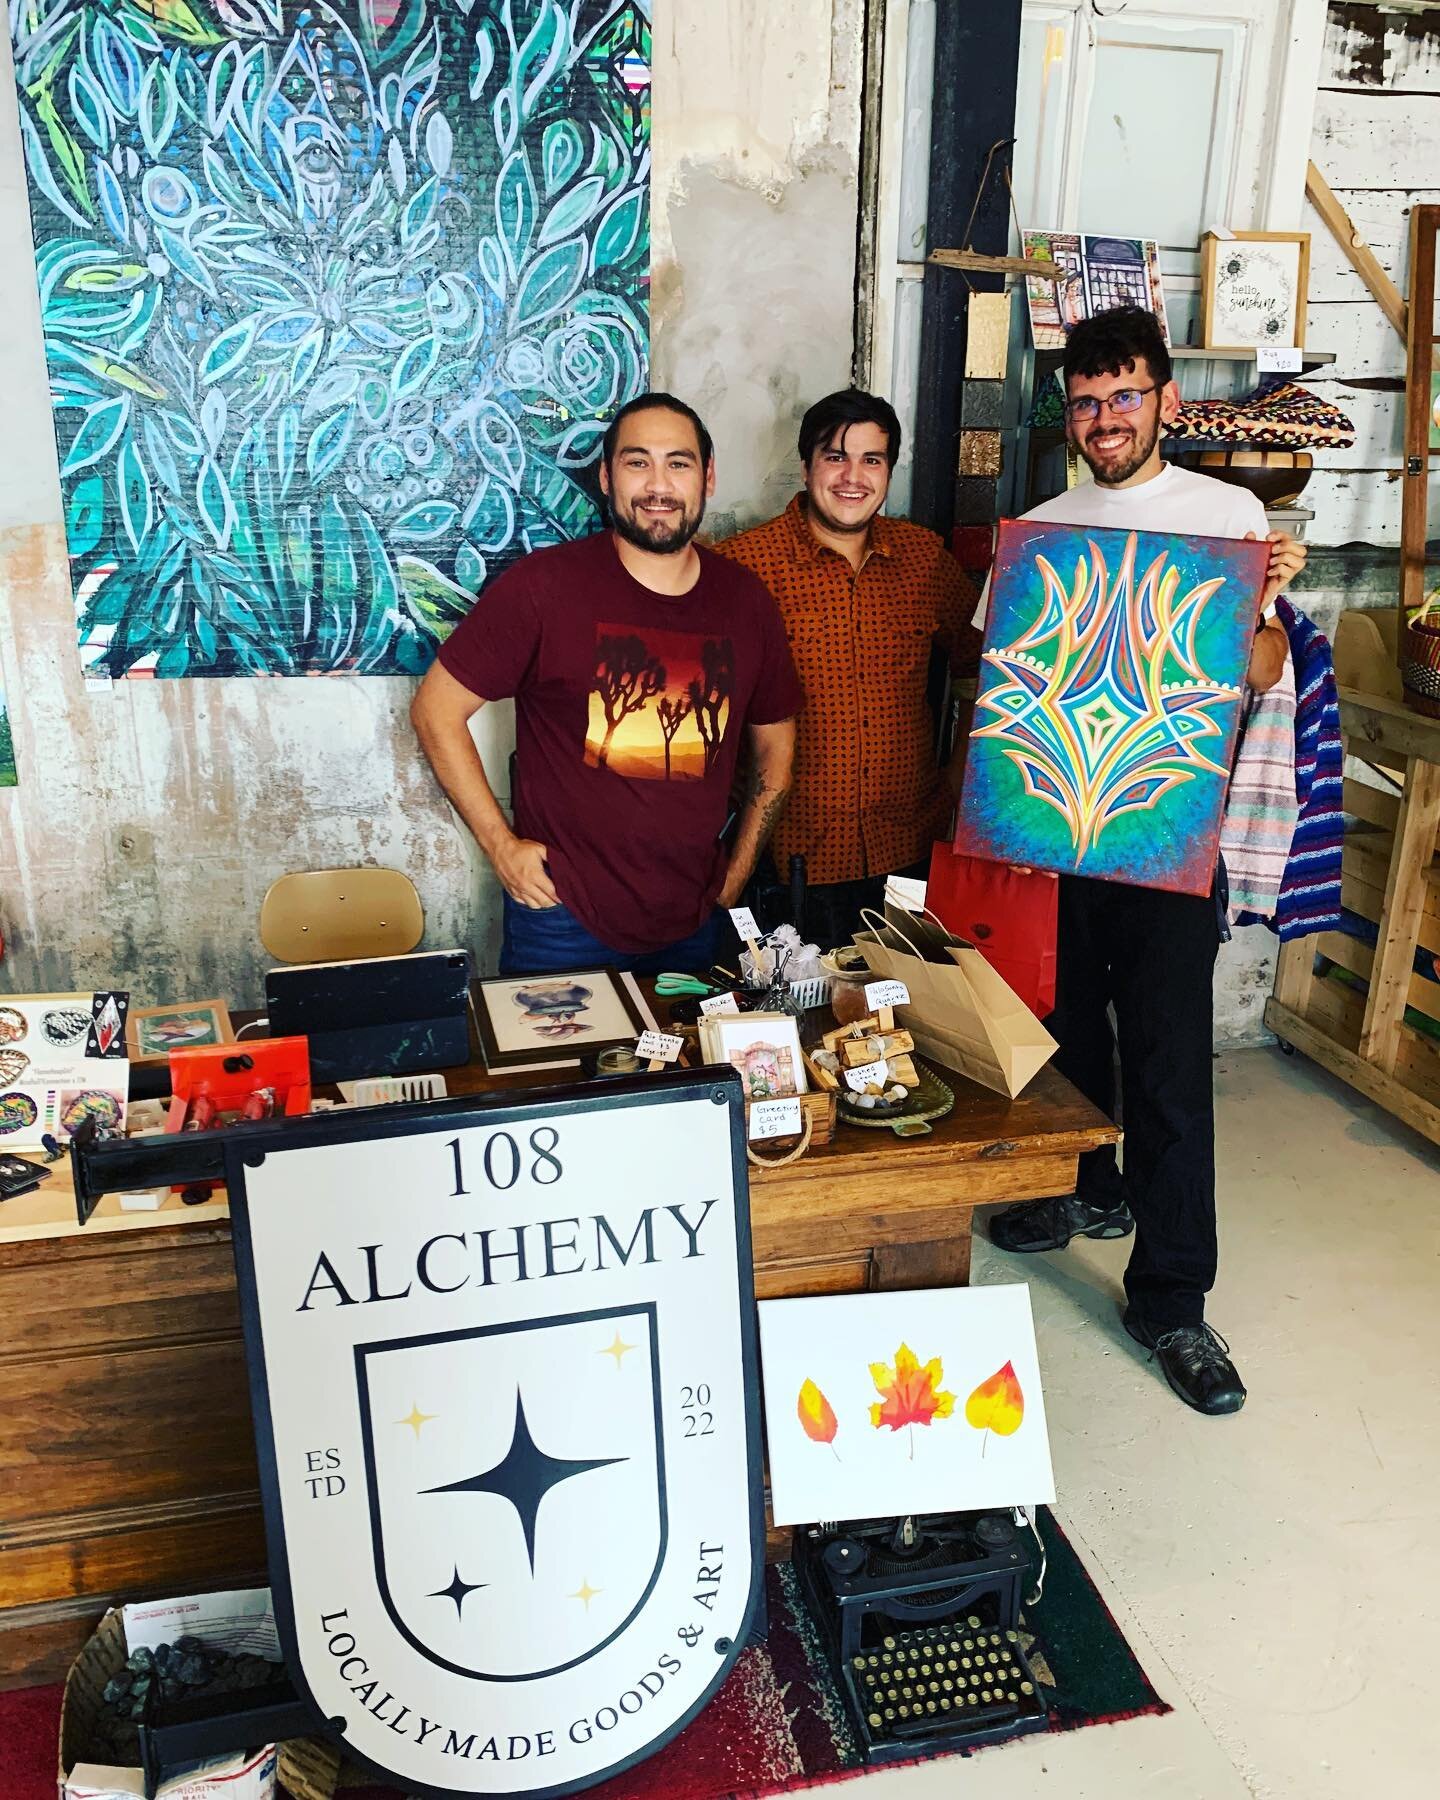 Thinking about art collectors&mdash; @nosh_2.0 has become a regular supporter when I visit @108alchemy! Thank you for continuing to support the dream of artists and showing the love 🙏💓